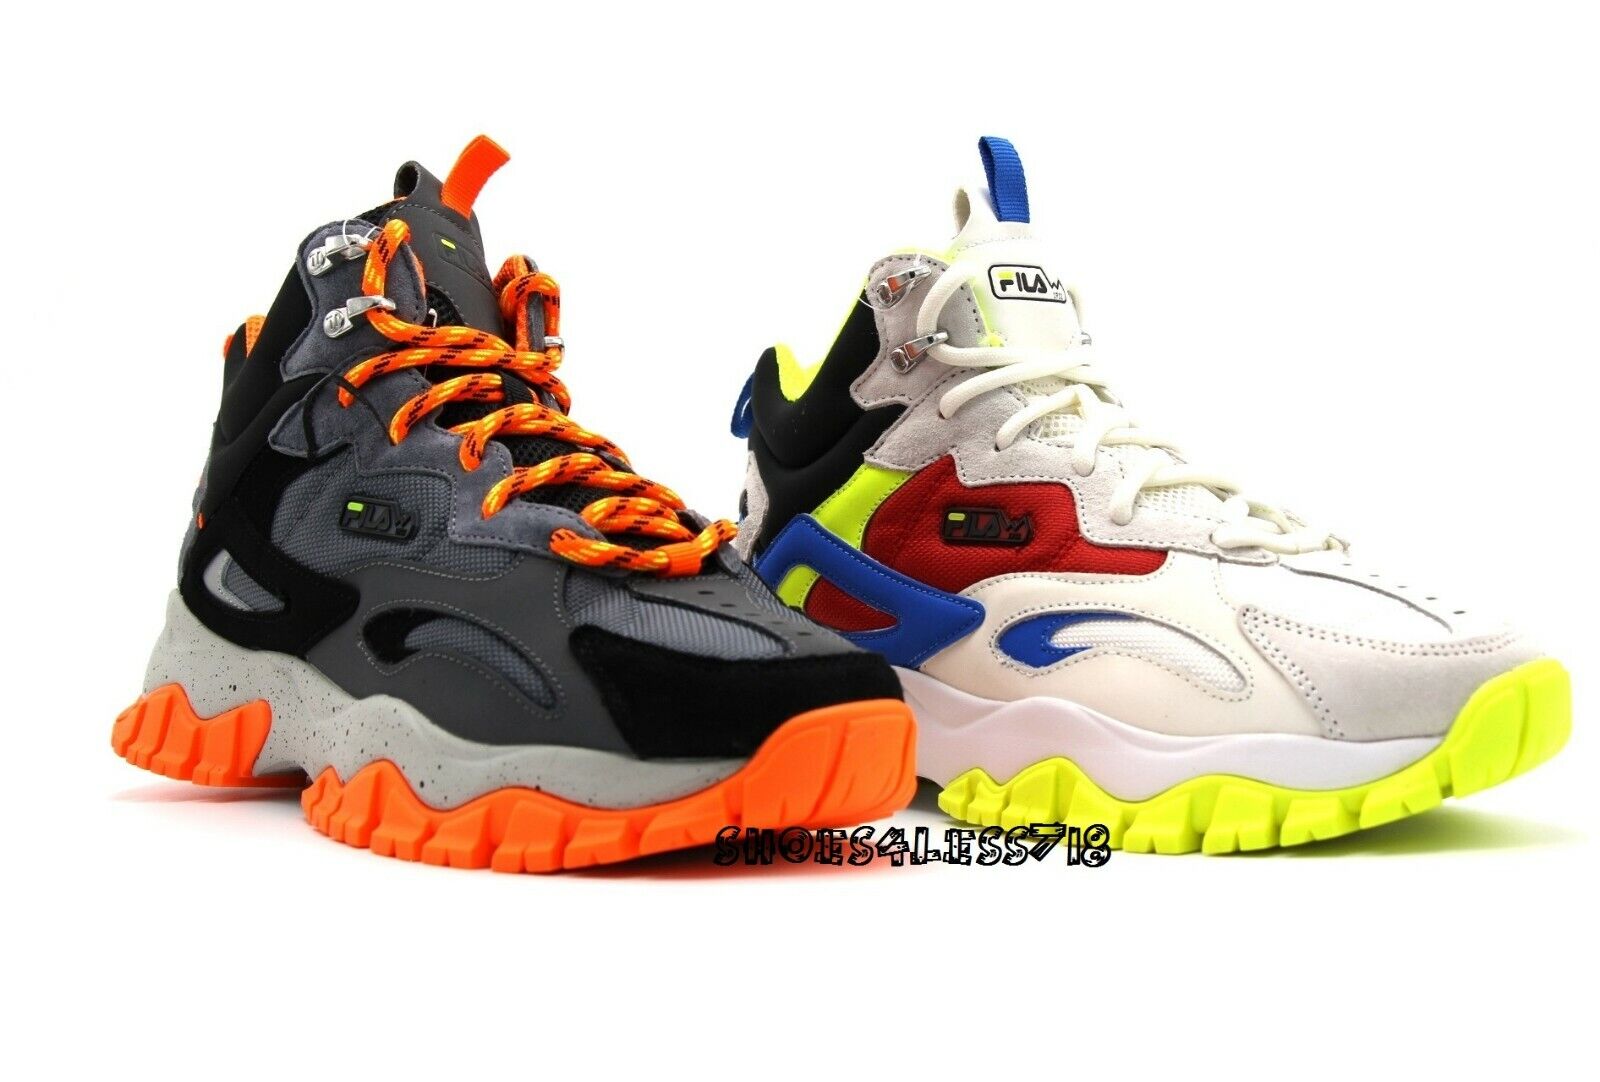 NEW MEN RAY TRACER TR MID LIMITED EDITION ORANGE GREEN HI TOP SNEAKERS | eBay